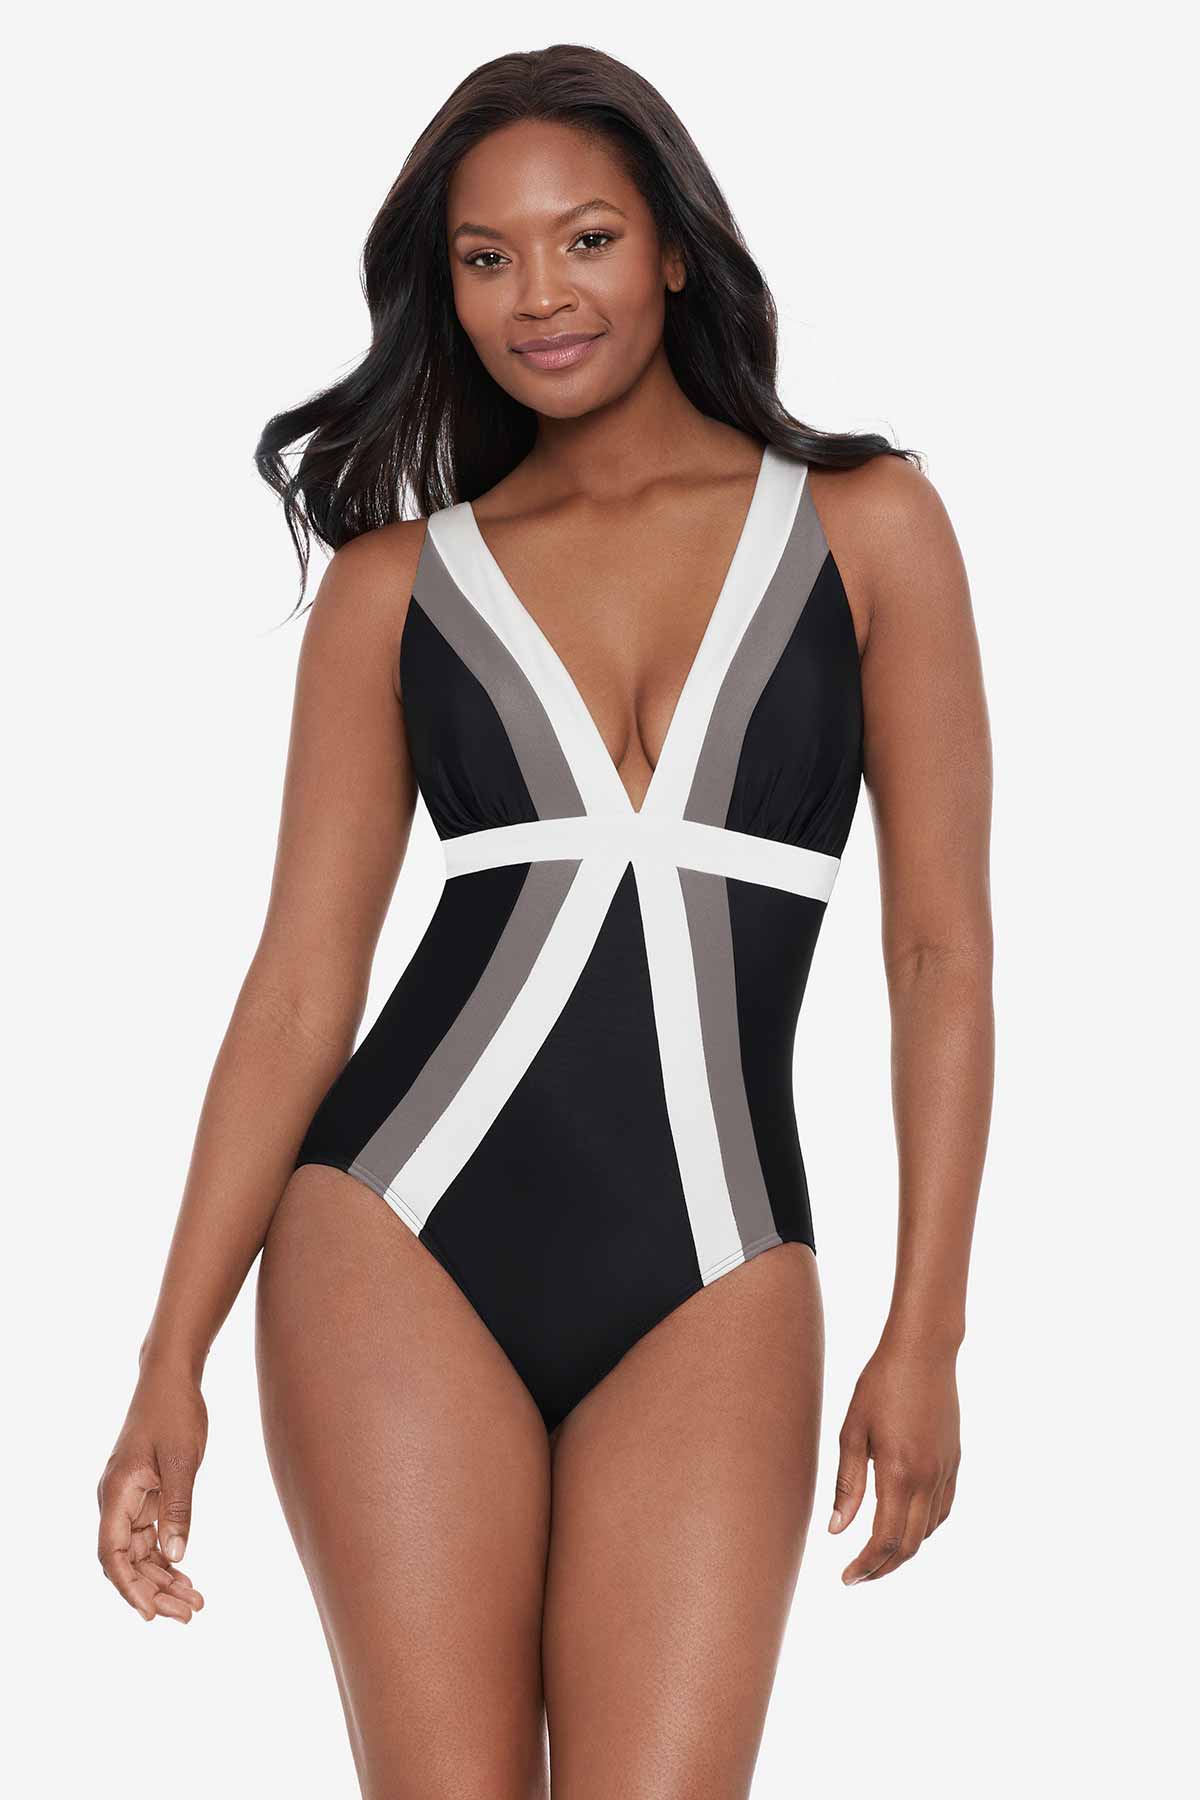 Miraclesuit Spectra Trilogy One Piece Swimsuit